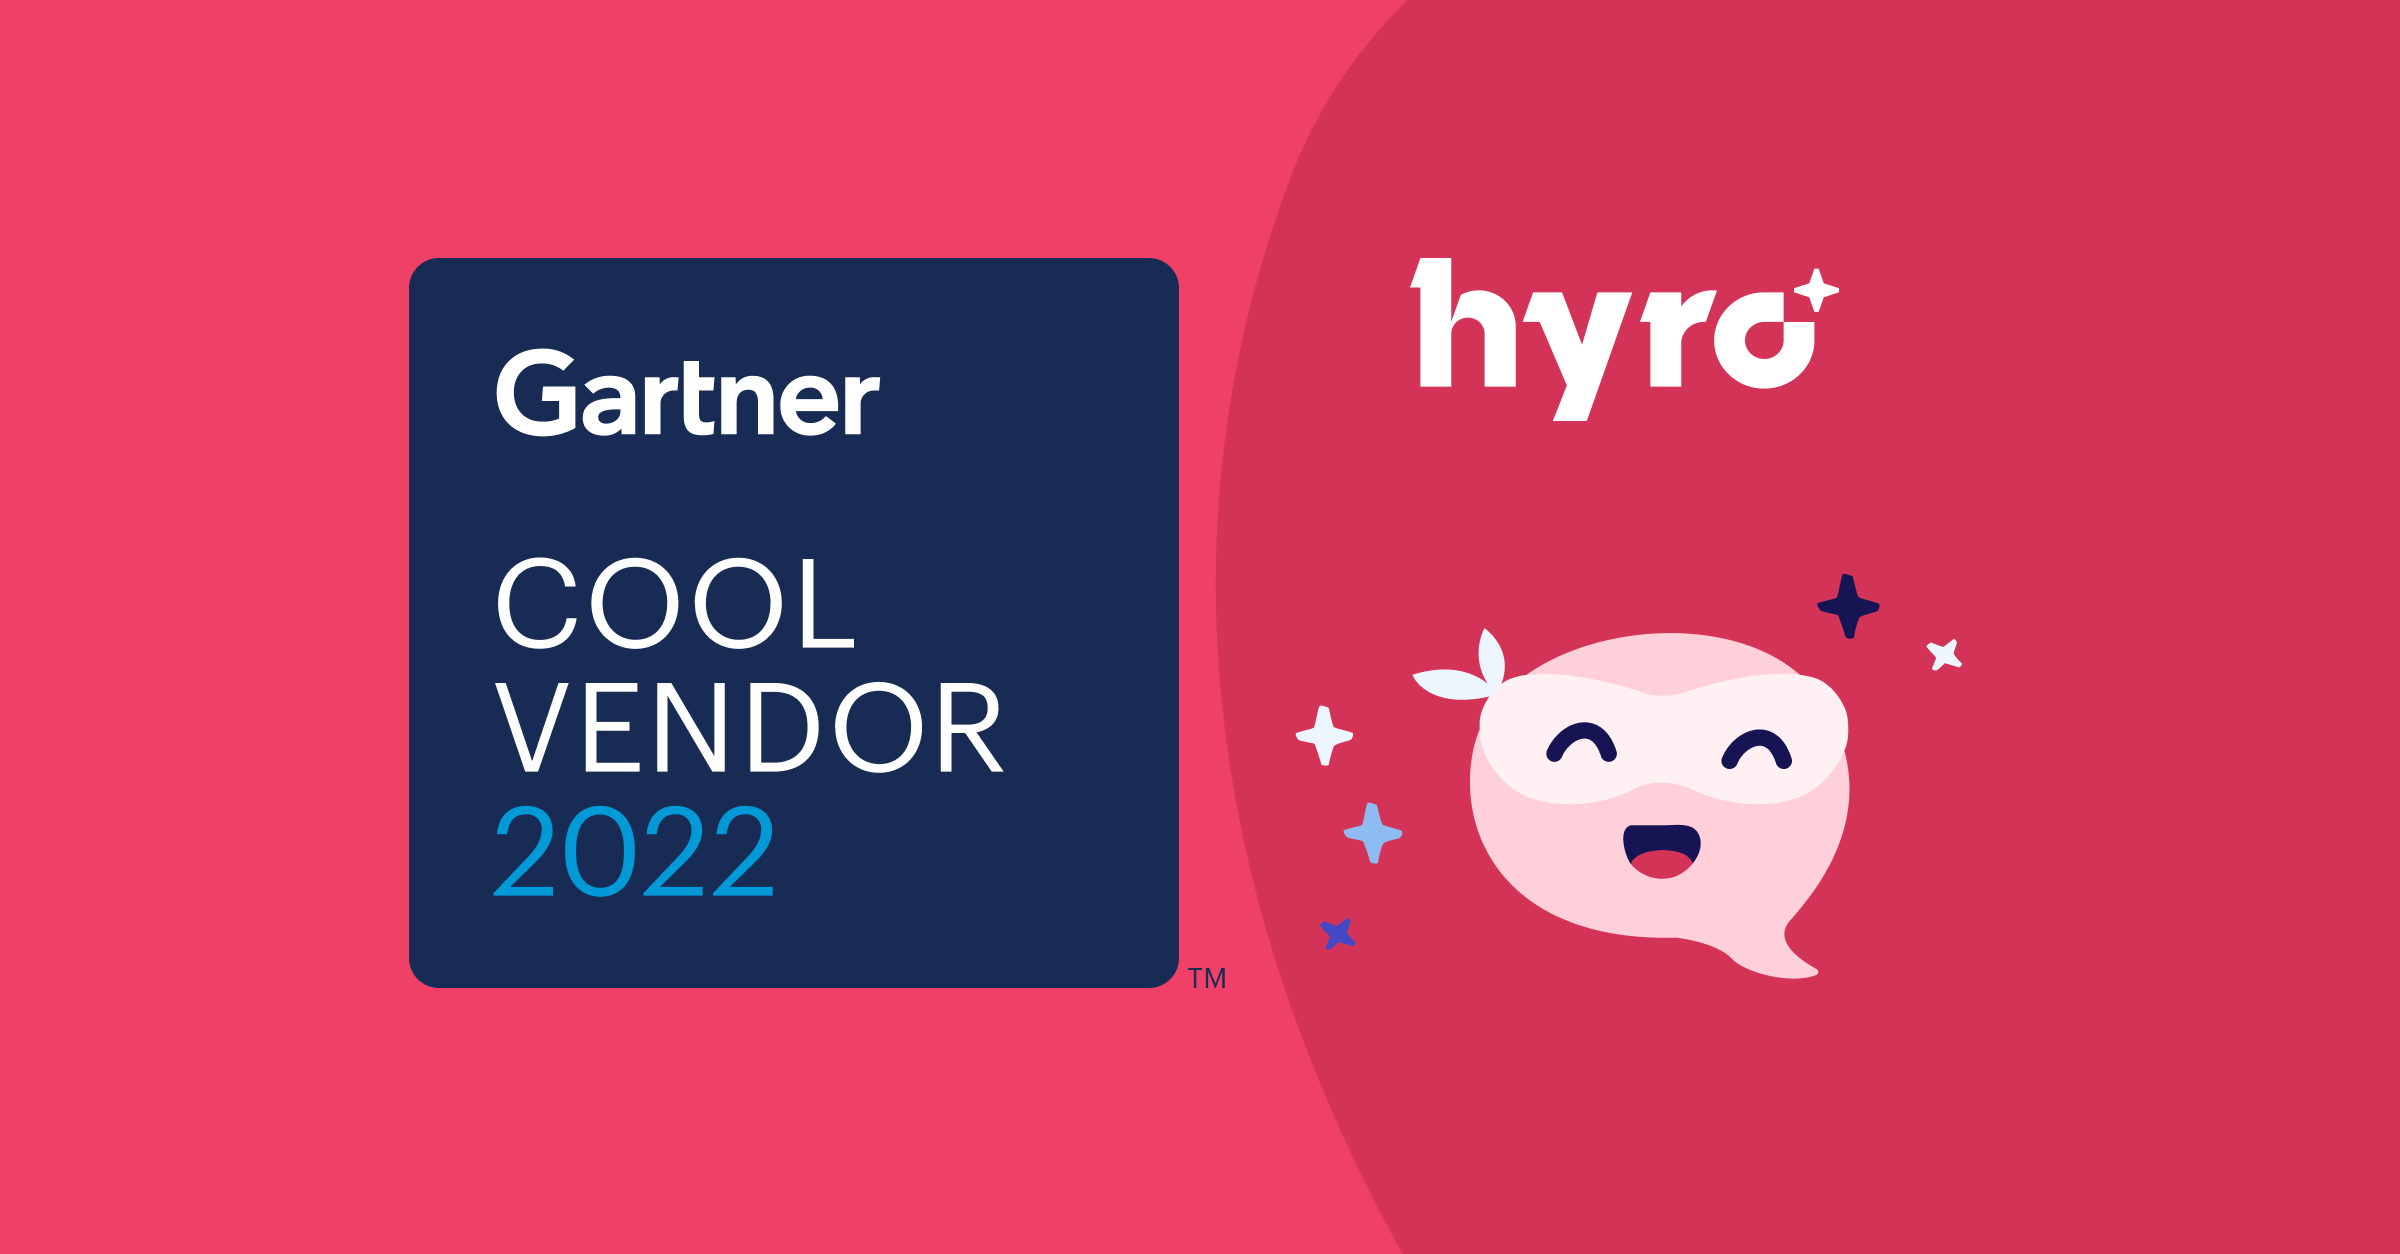 Hyro Named as Gartner® Cool Vendor™ 2022 in Conversational and Natural Language Technology